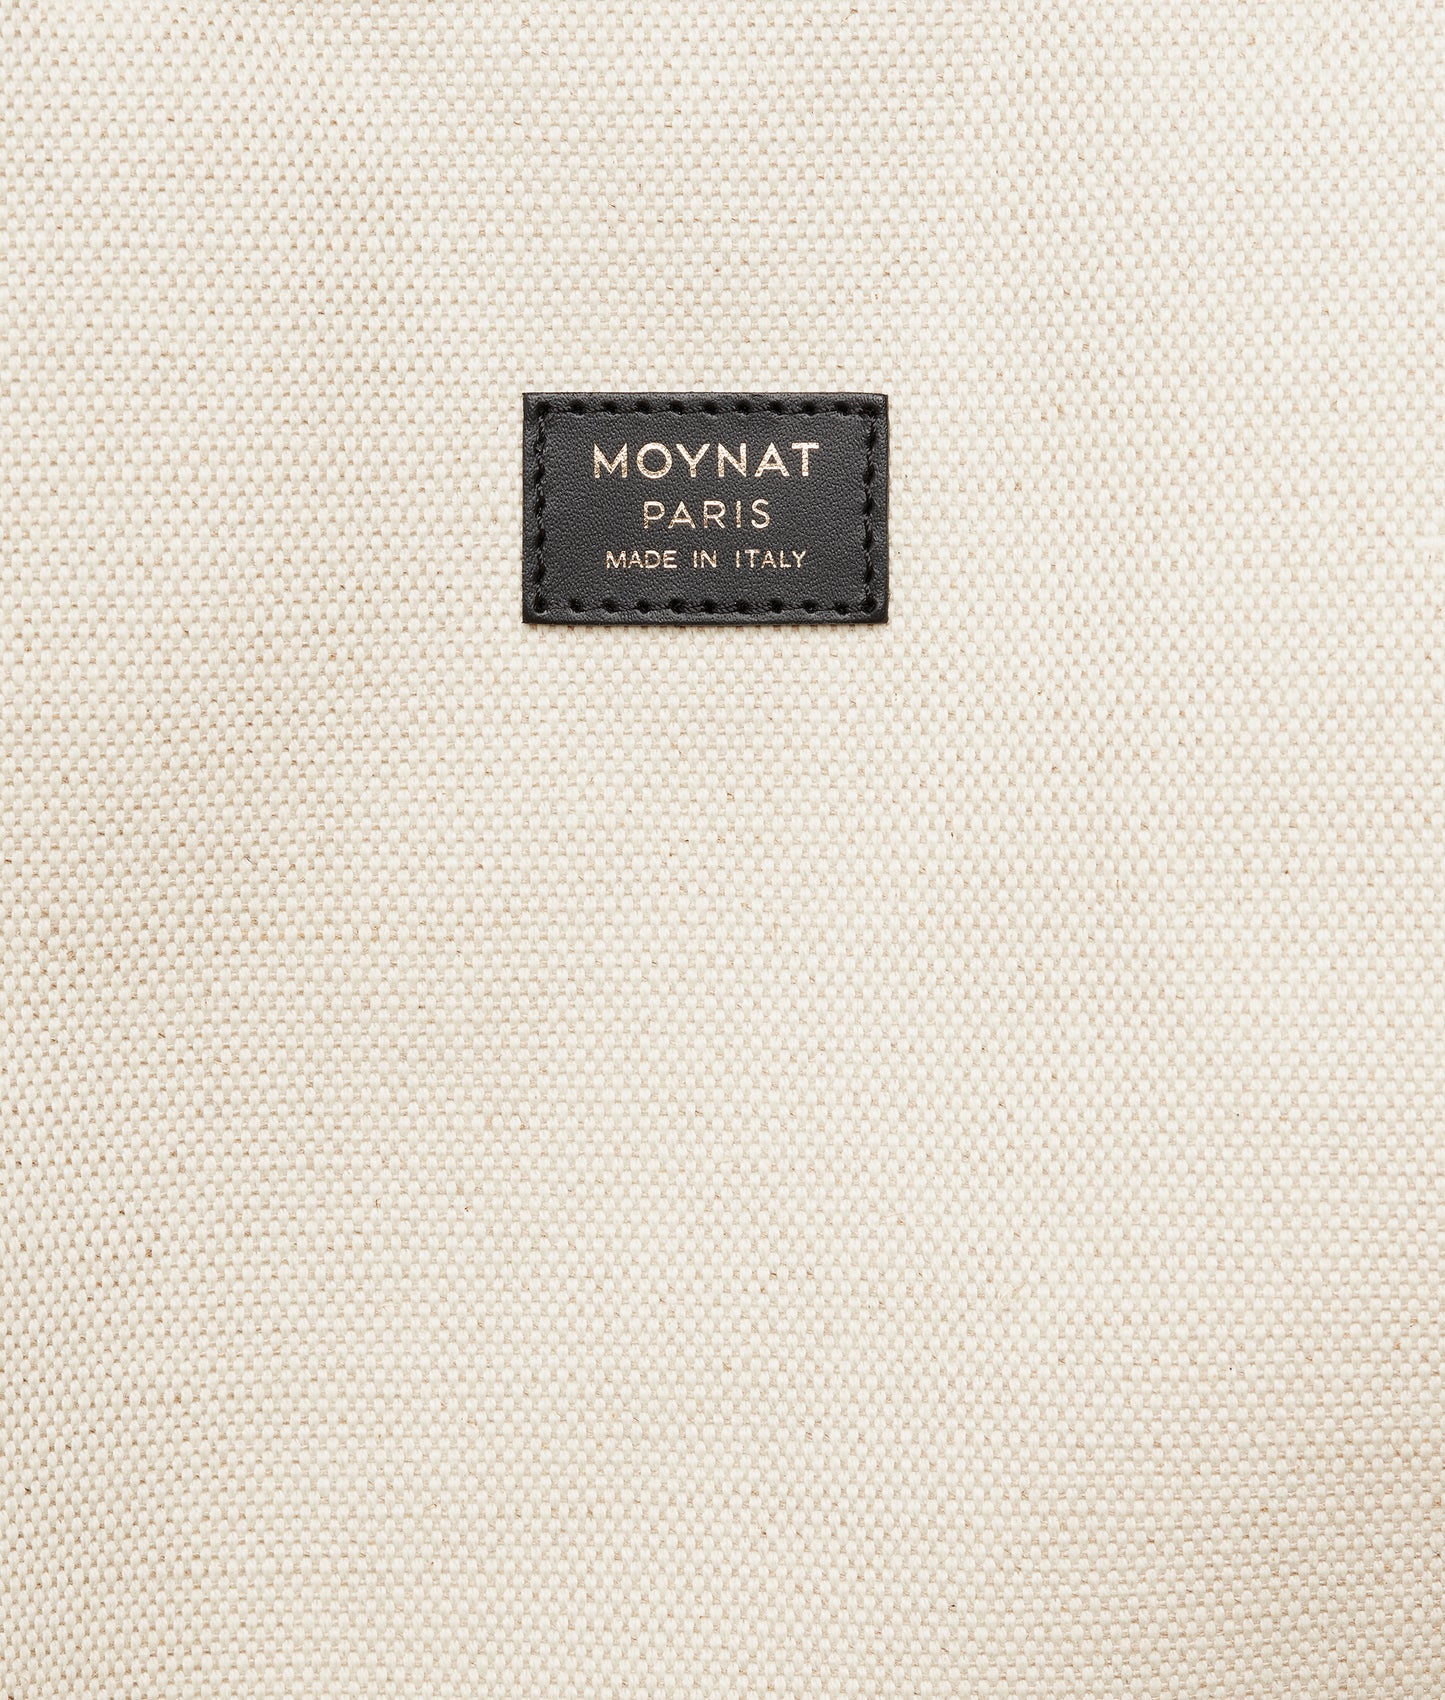 Moynat's Oh Tote Comes in a New Canvas 1920 Line